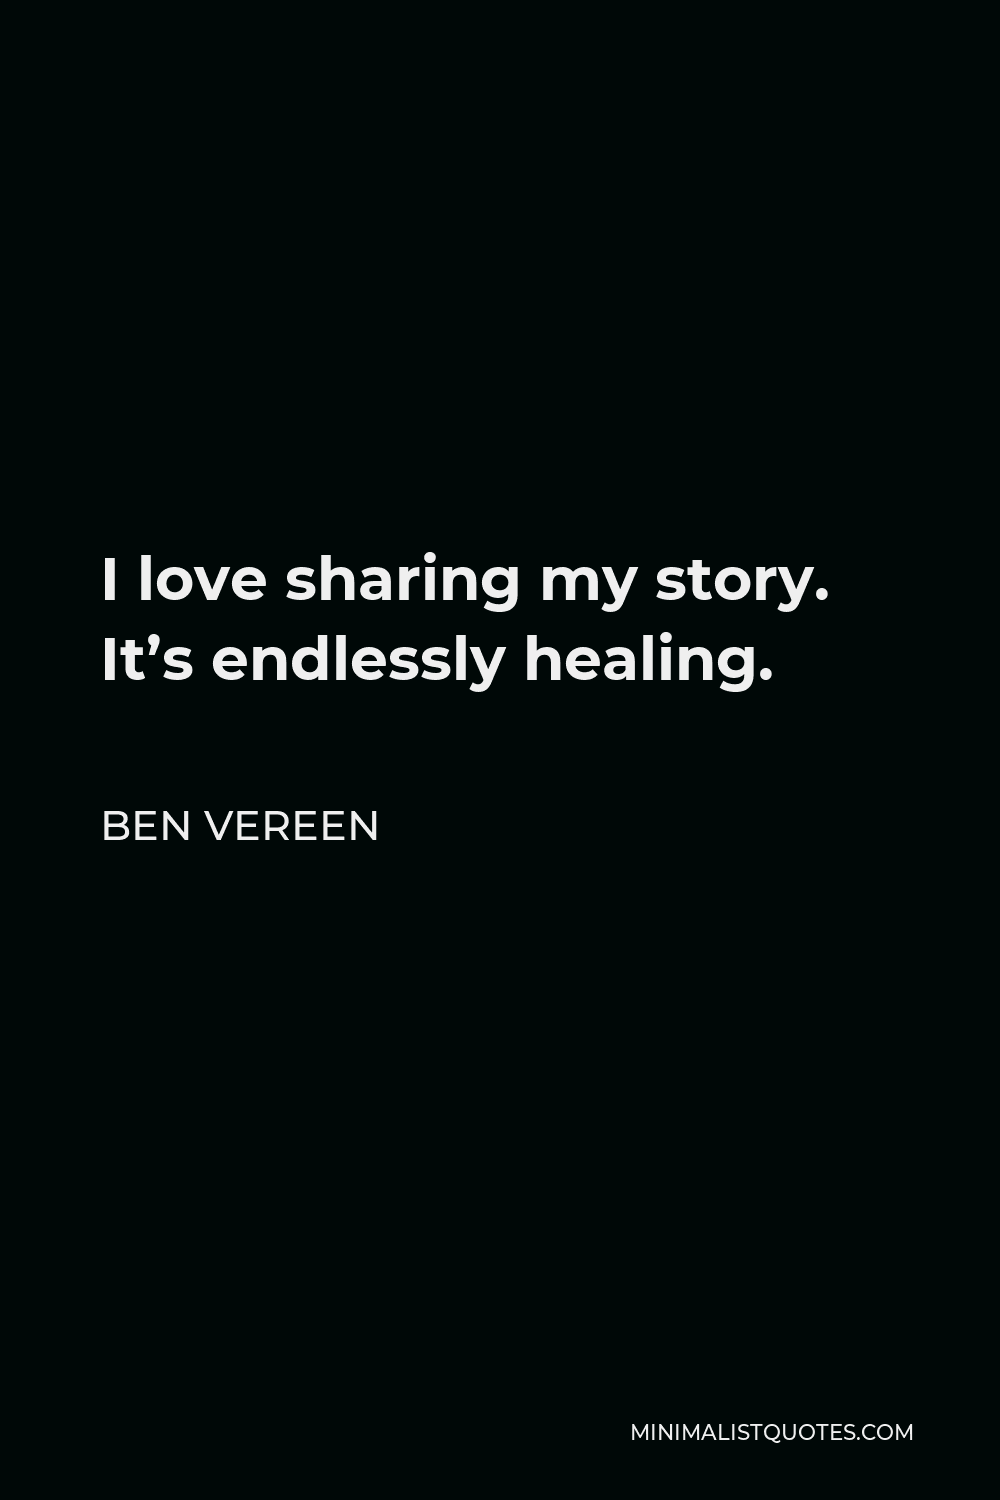 Ben Vereen Quote - I love sharing my story. It’s endlessly healing.